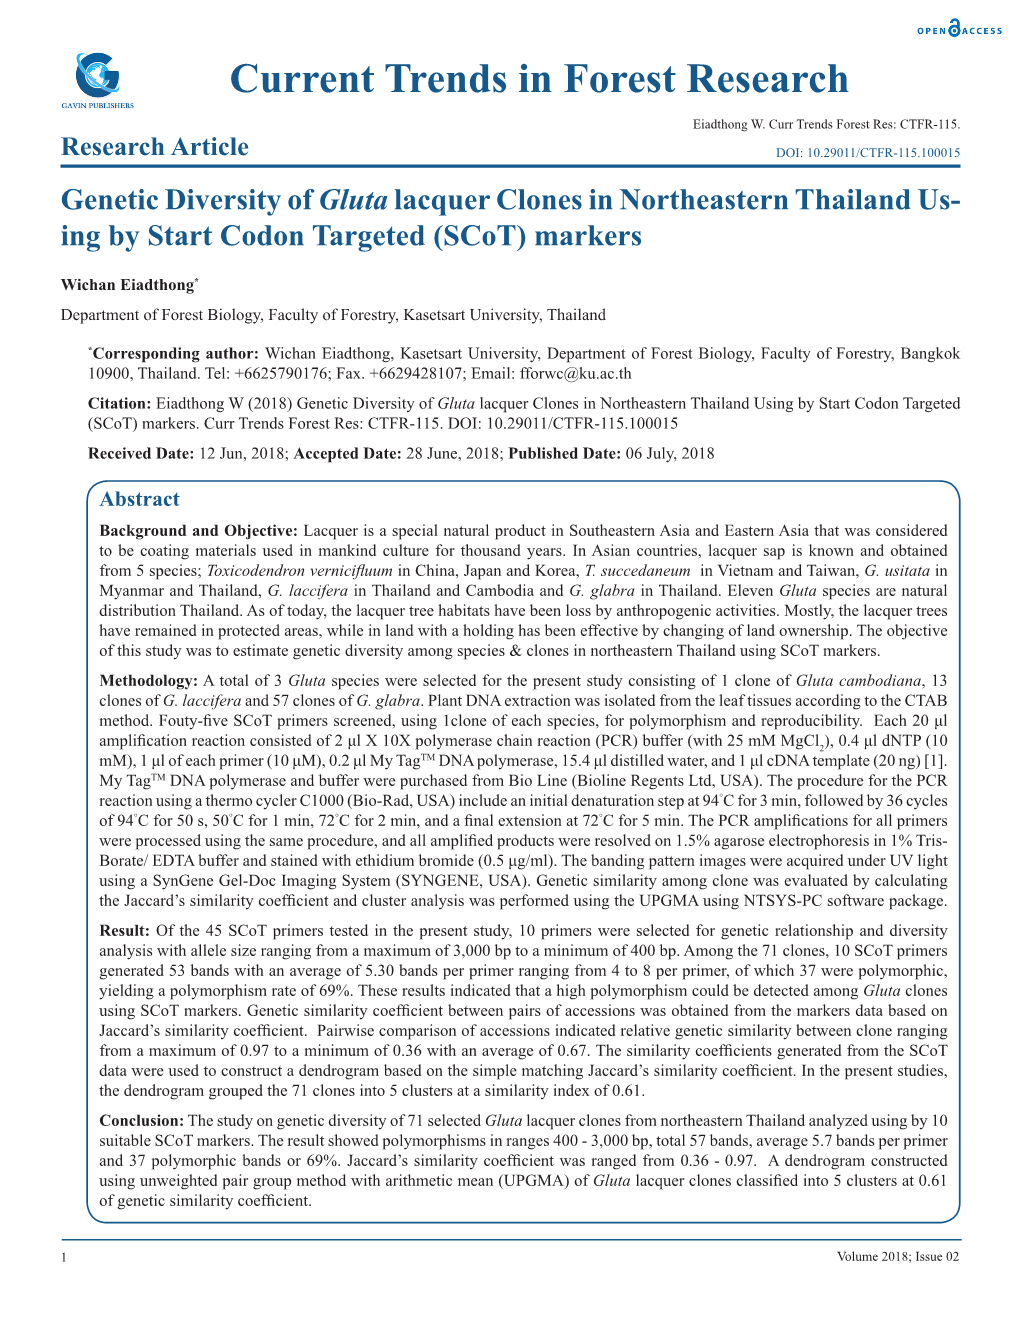 Genetic Diversity of Gluta Lacquer Clones in Northeastern Thailand Us- Ing by Start Codon Targeted (Scot) Markers